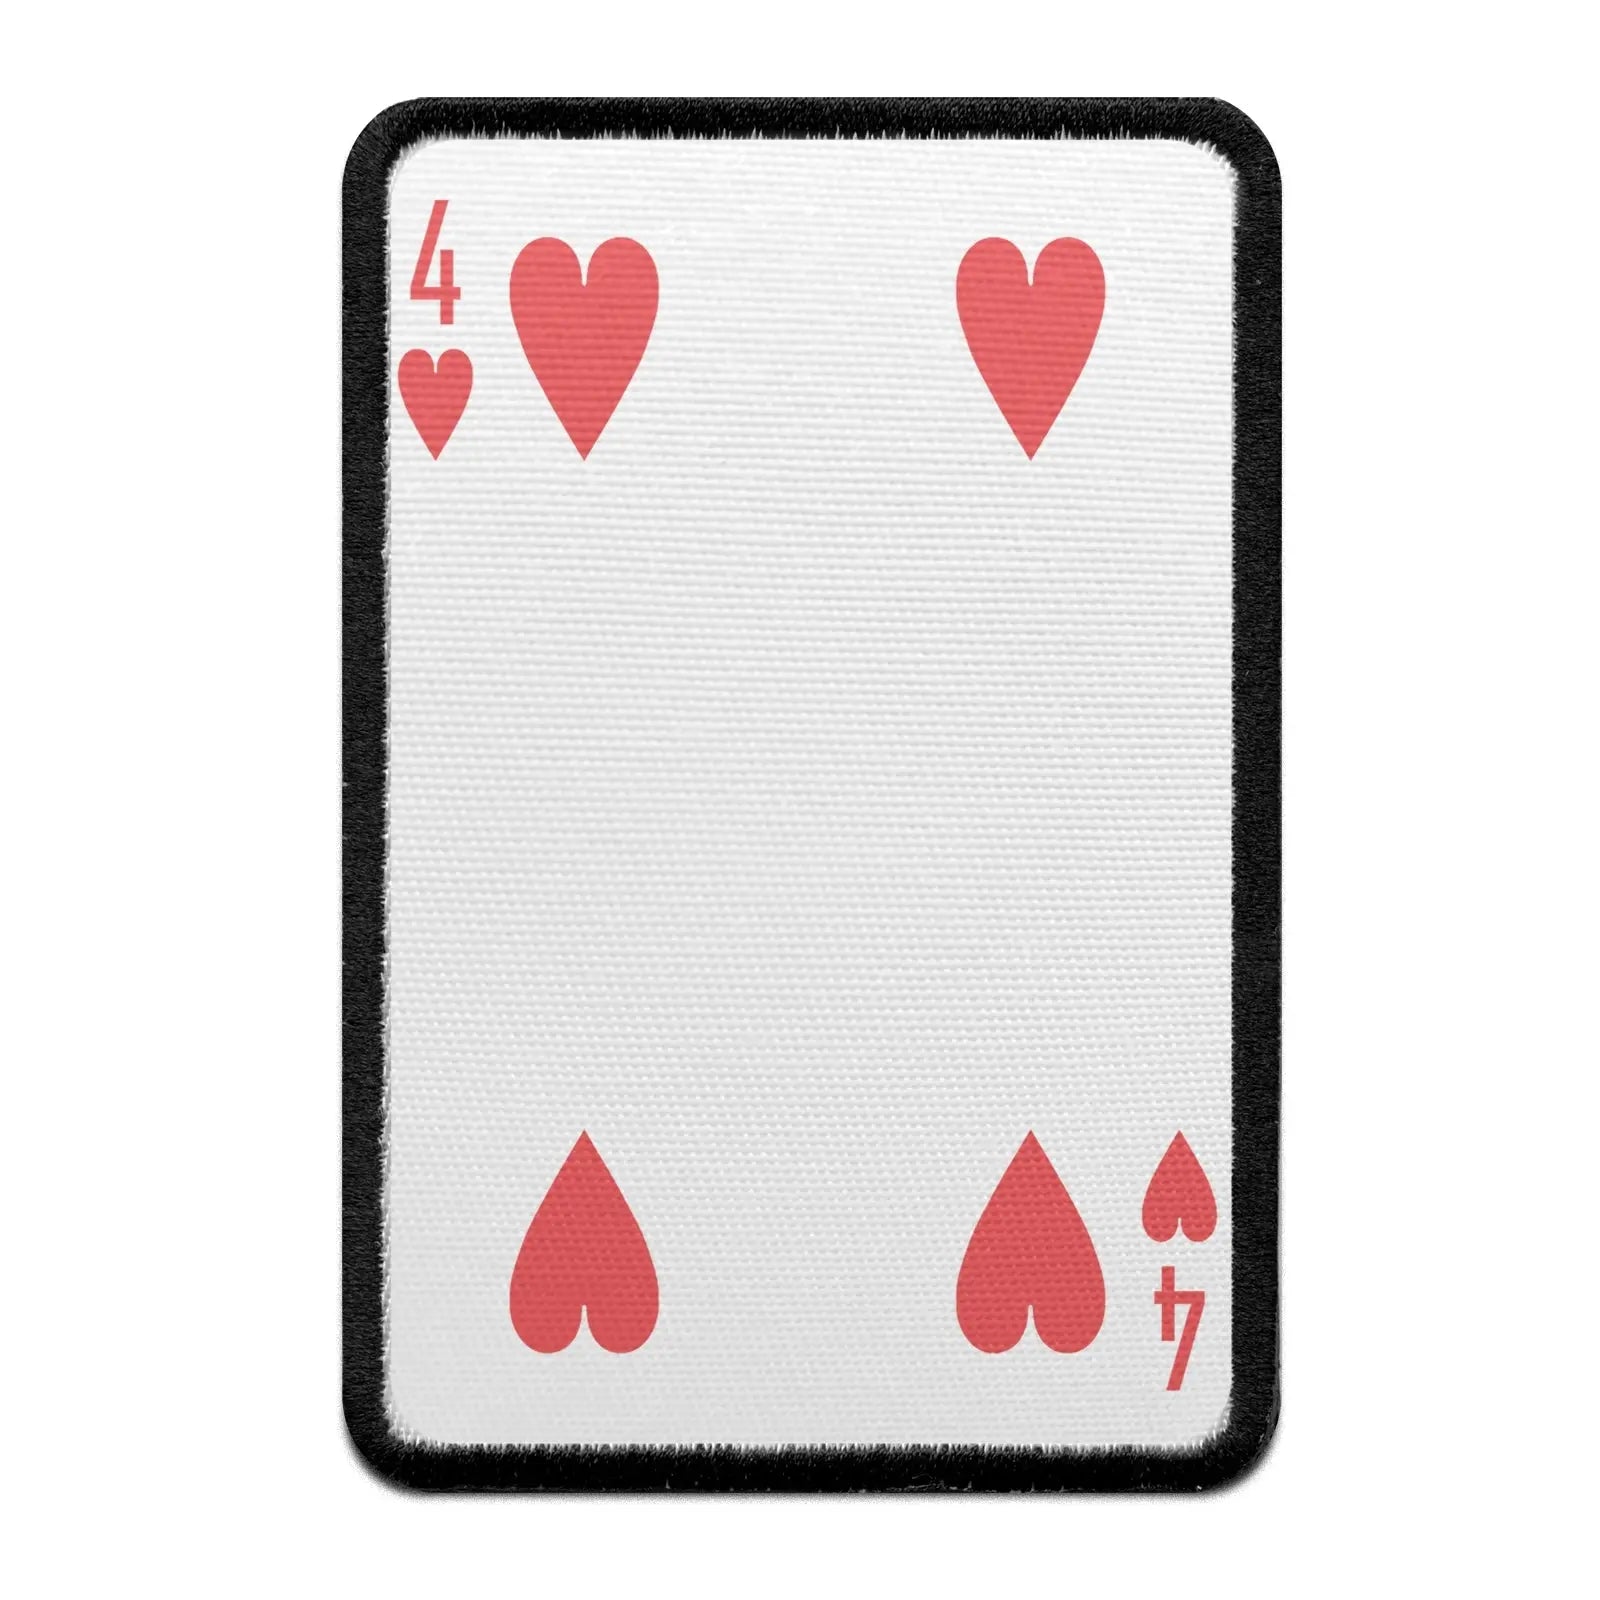 Four Of Hearts Card FotoPatch Game Deck Embroidered Iron On 